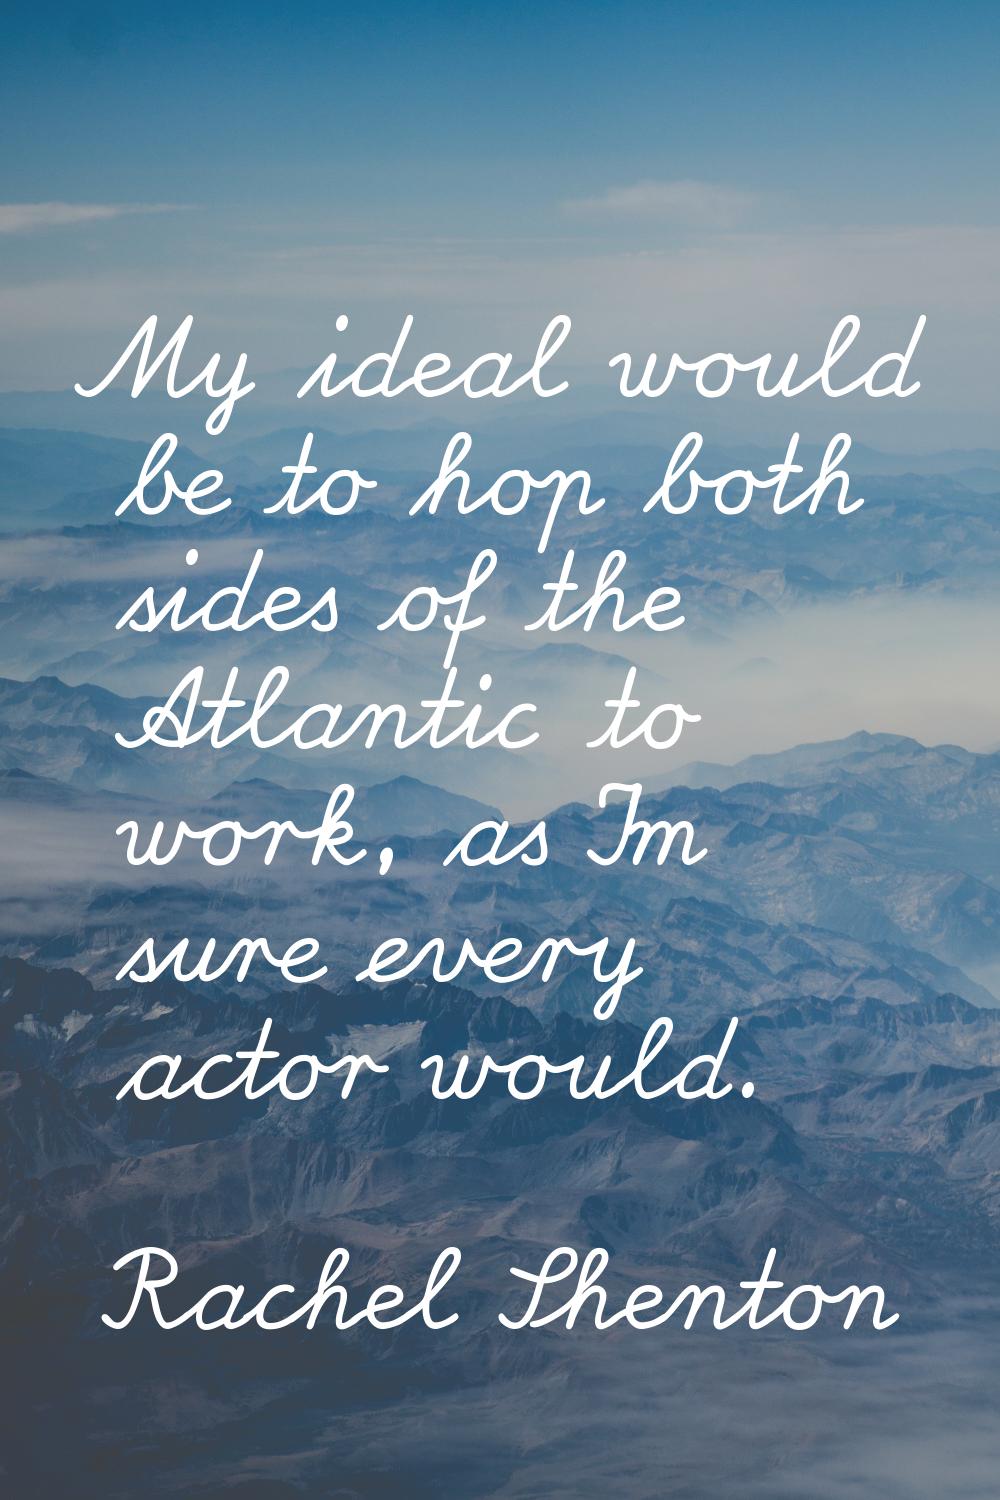 My ideal would be to hop both sides of the Atlantic to work, as I'm sure every actor would.